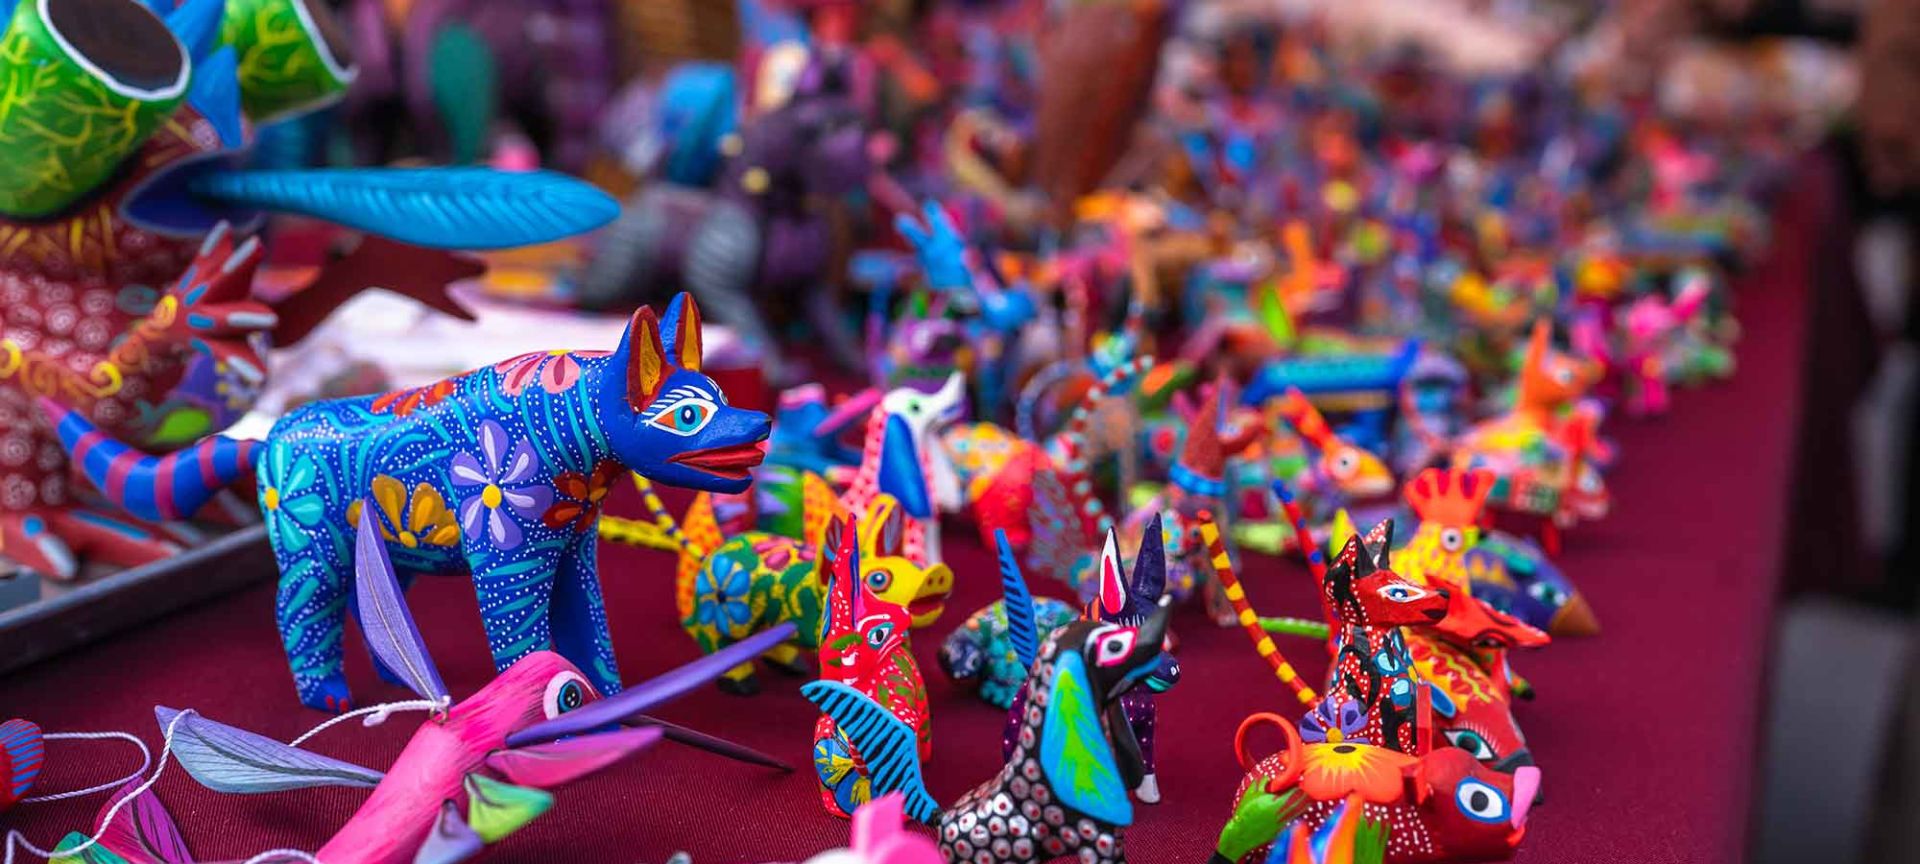 A Group Of Colorful Figurines